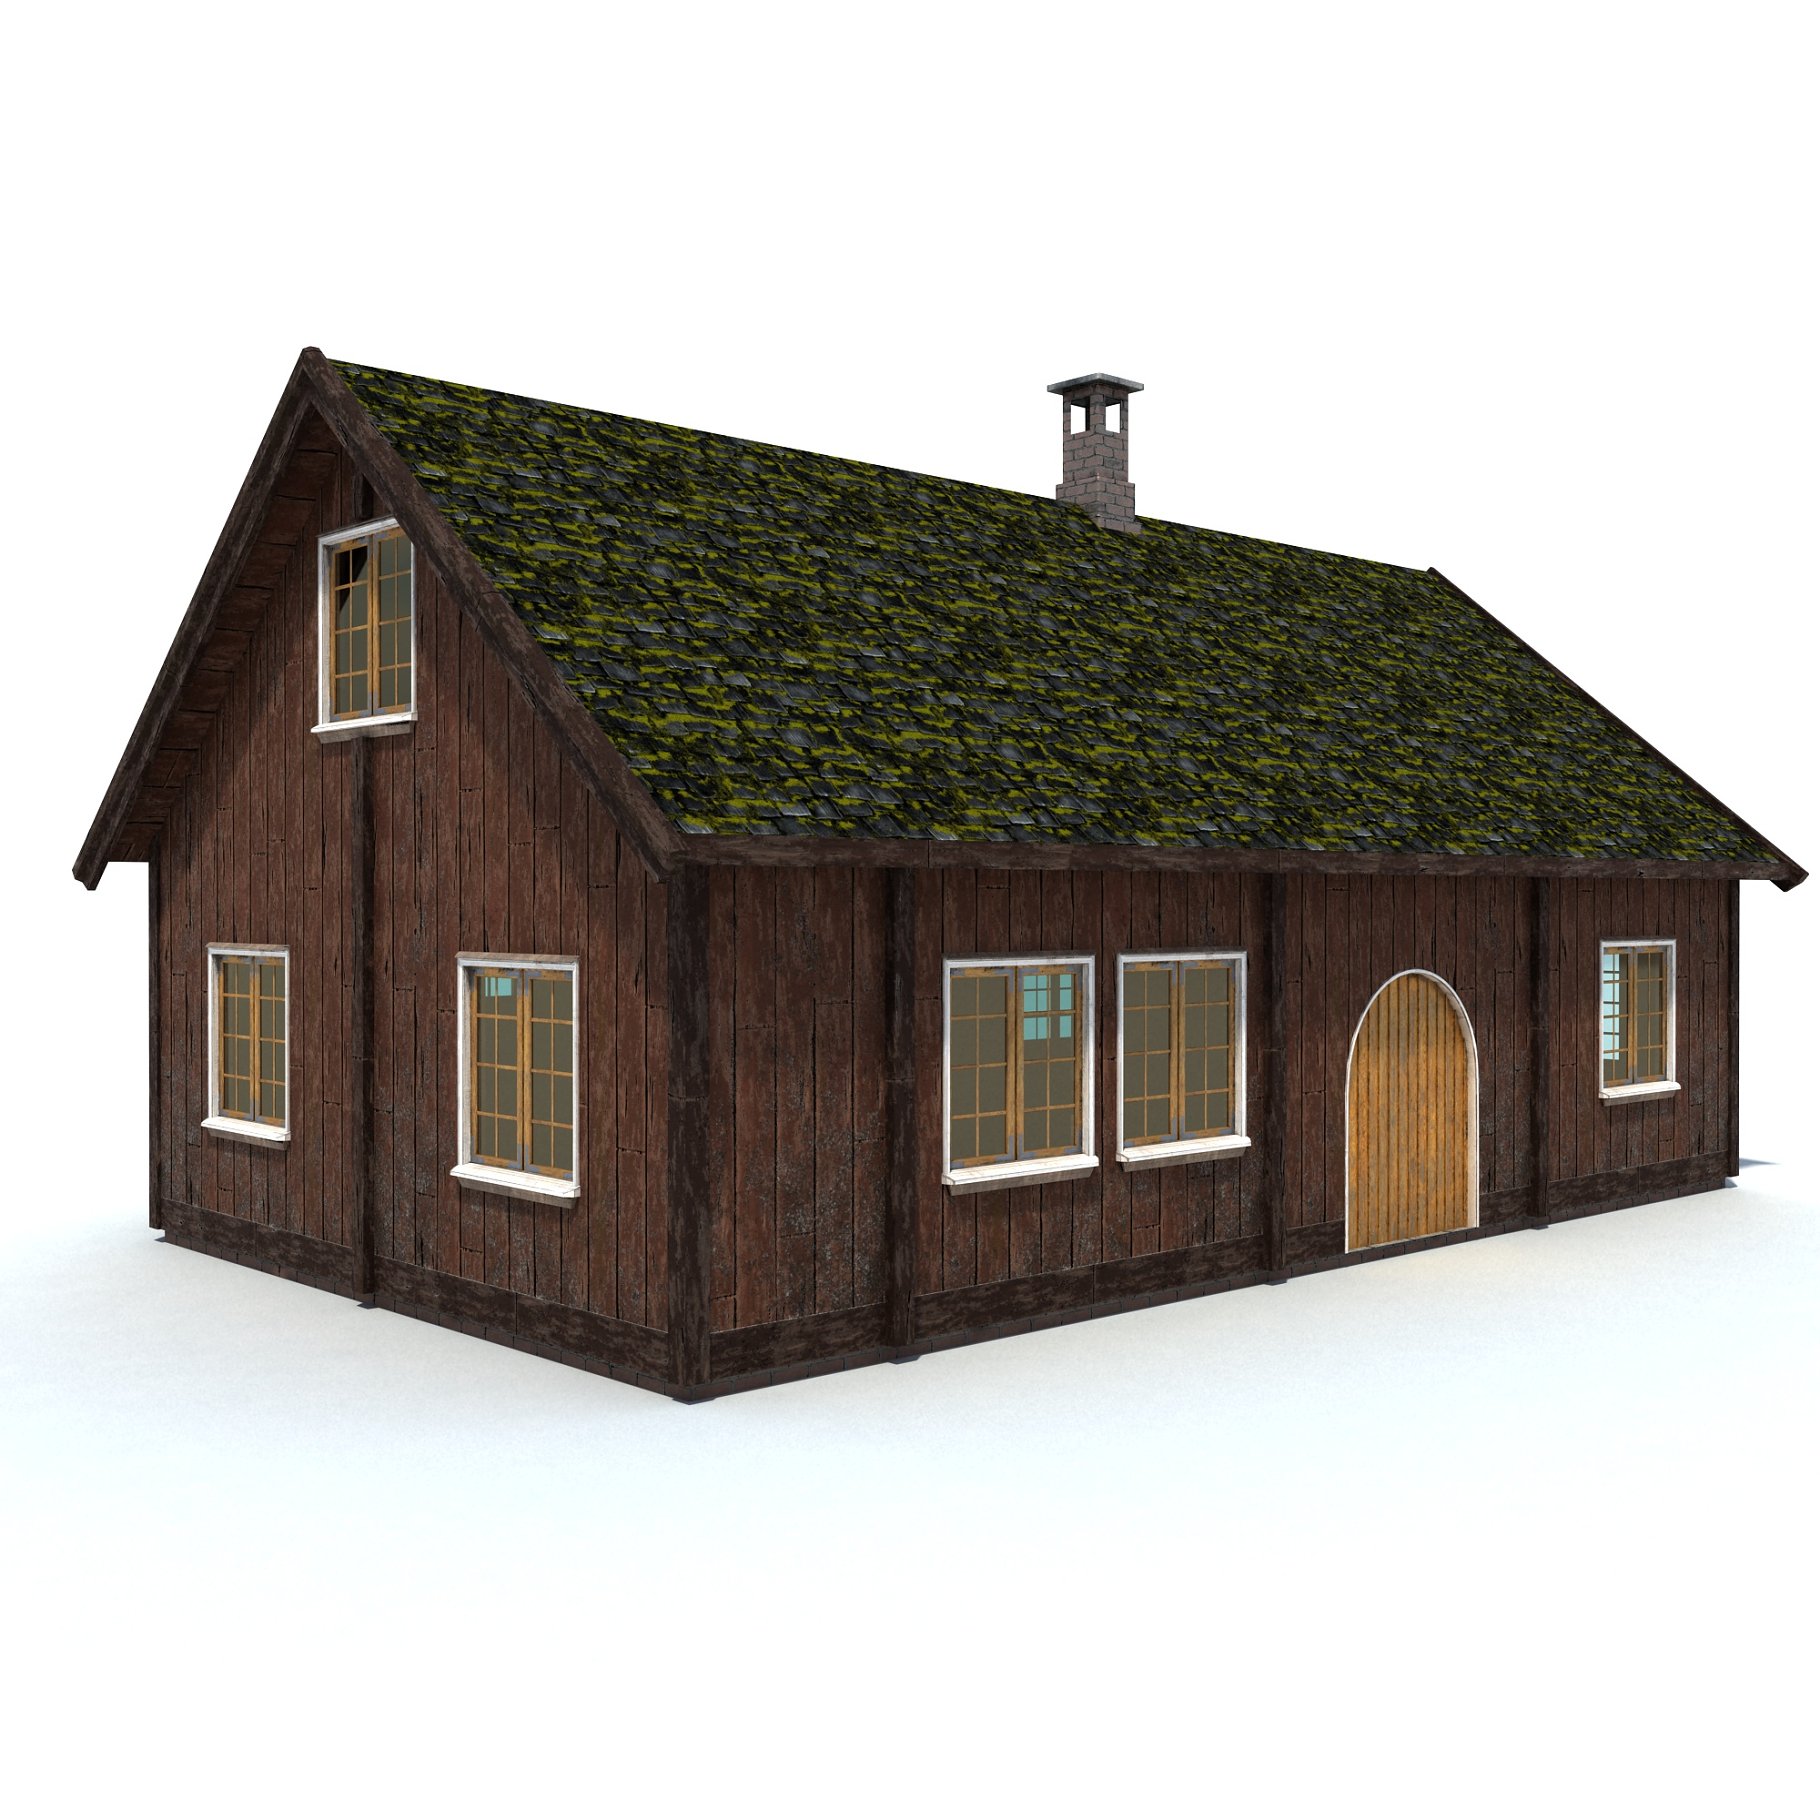 Mockup of old house low poly on a white background.